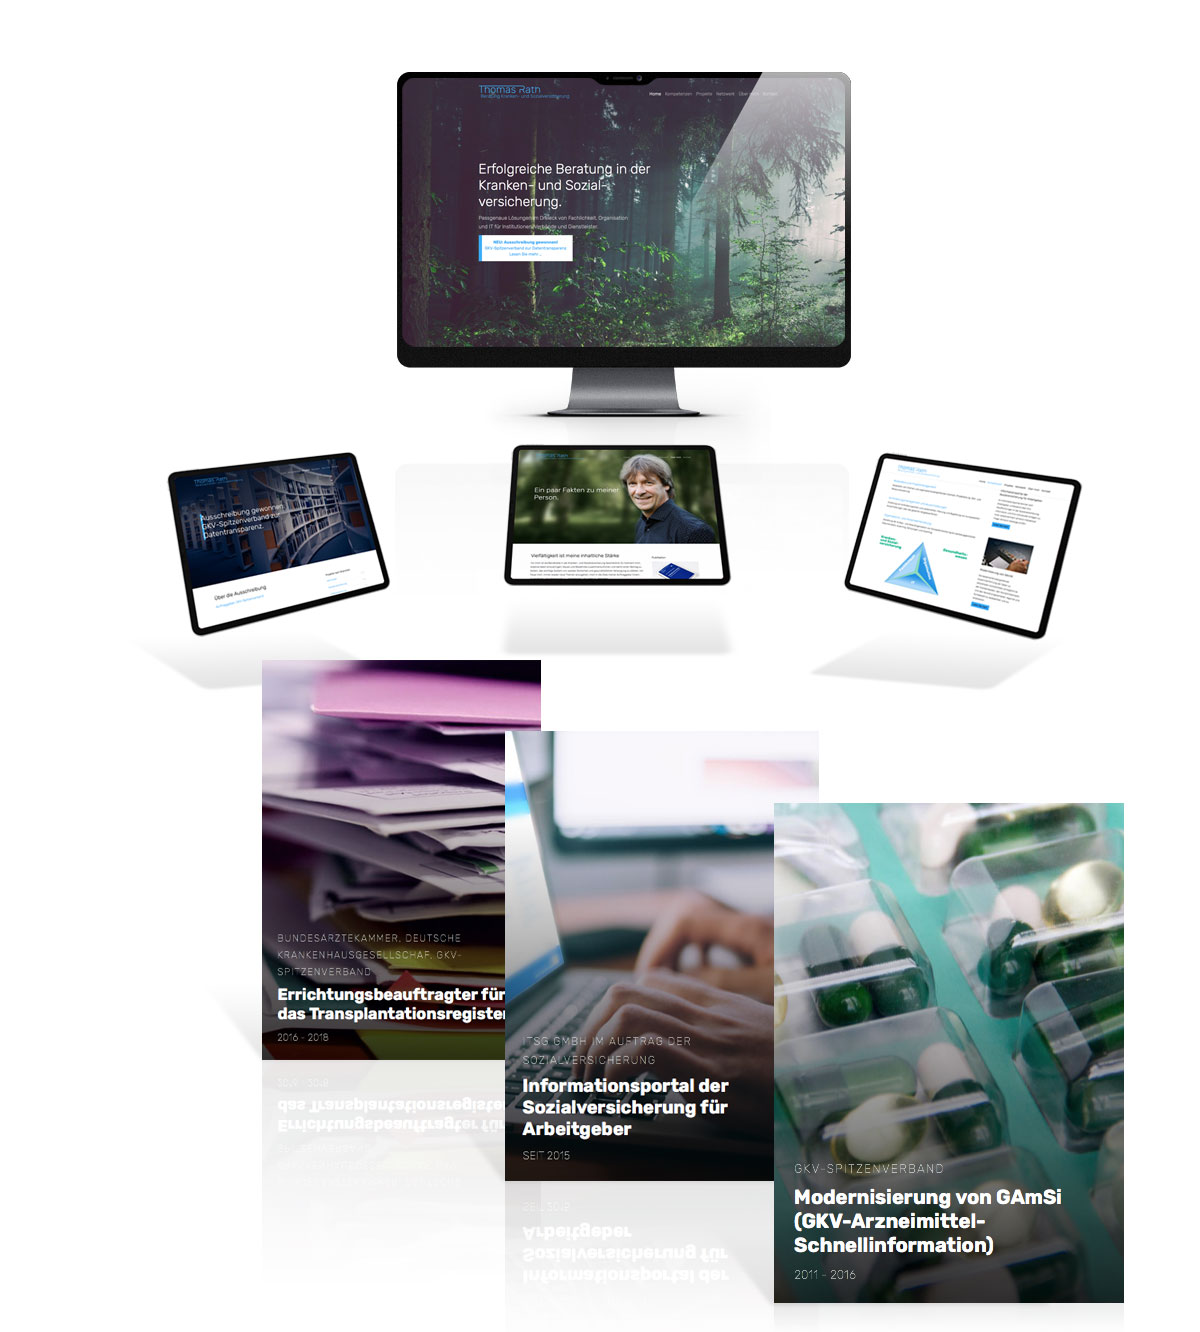 Free HTML5 Template